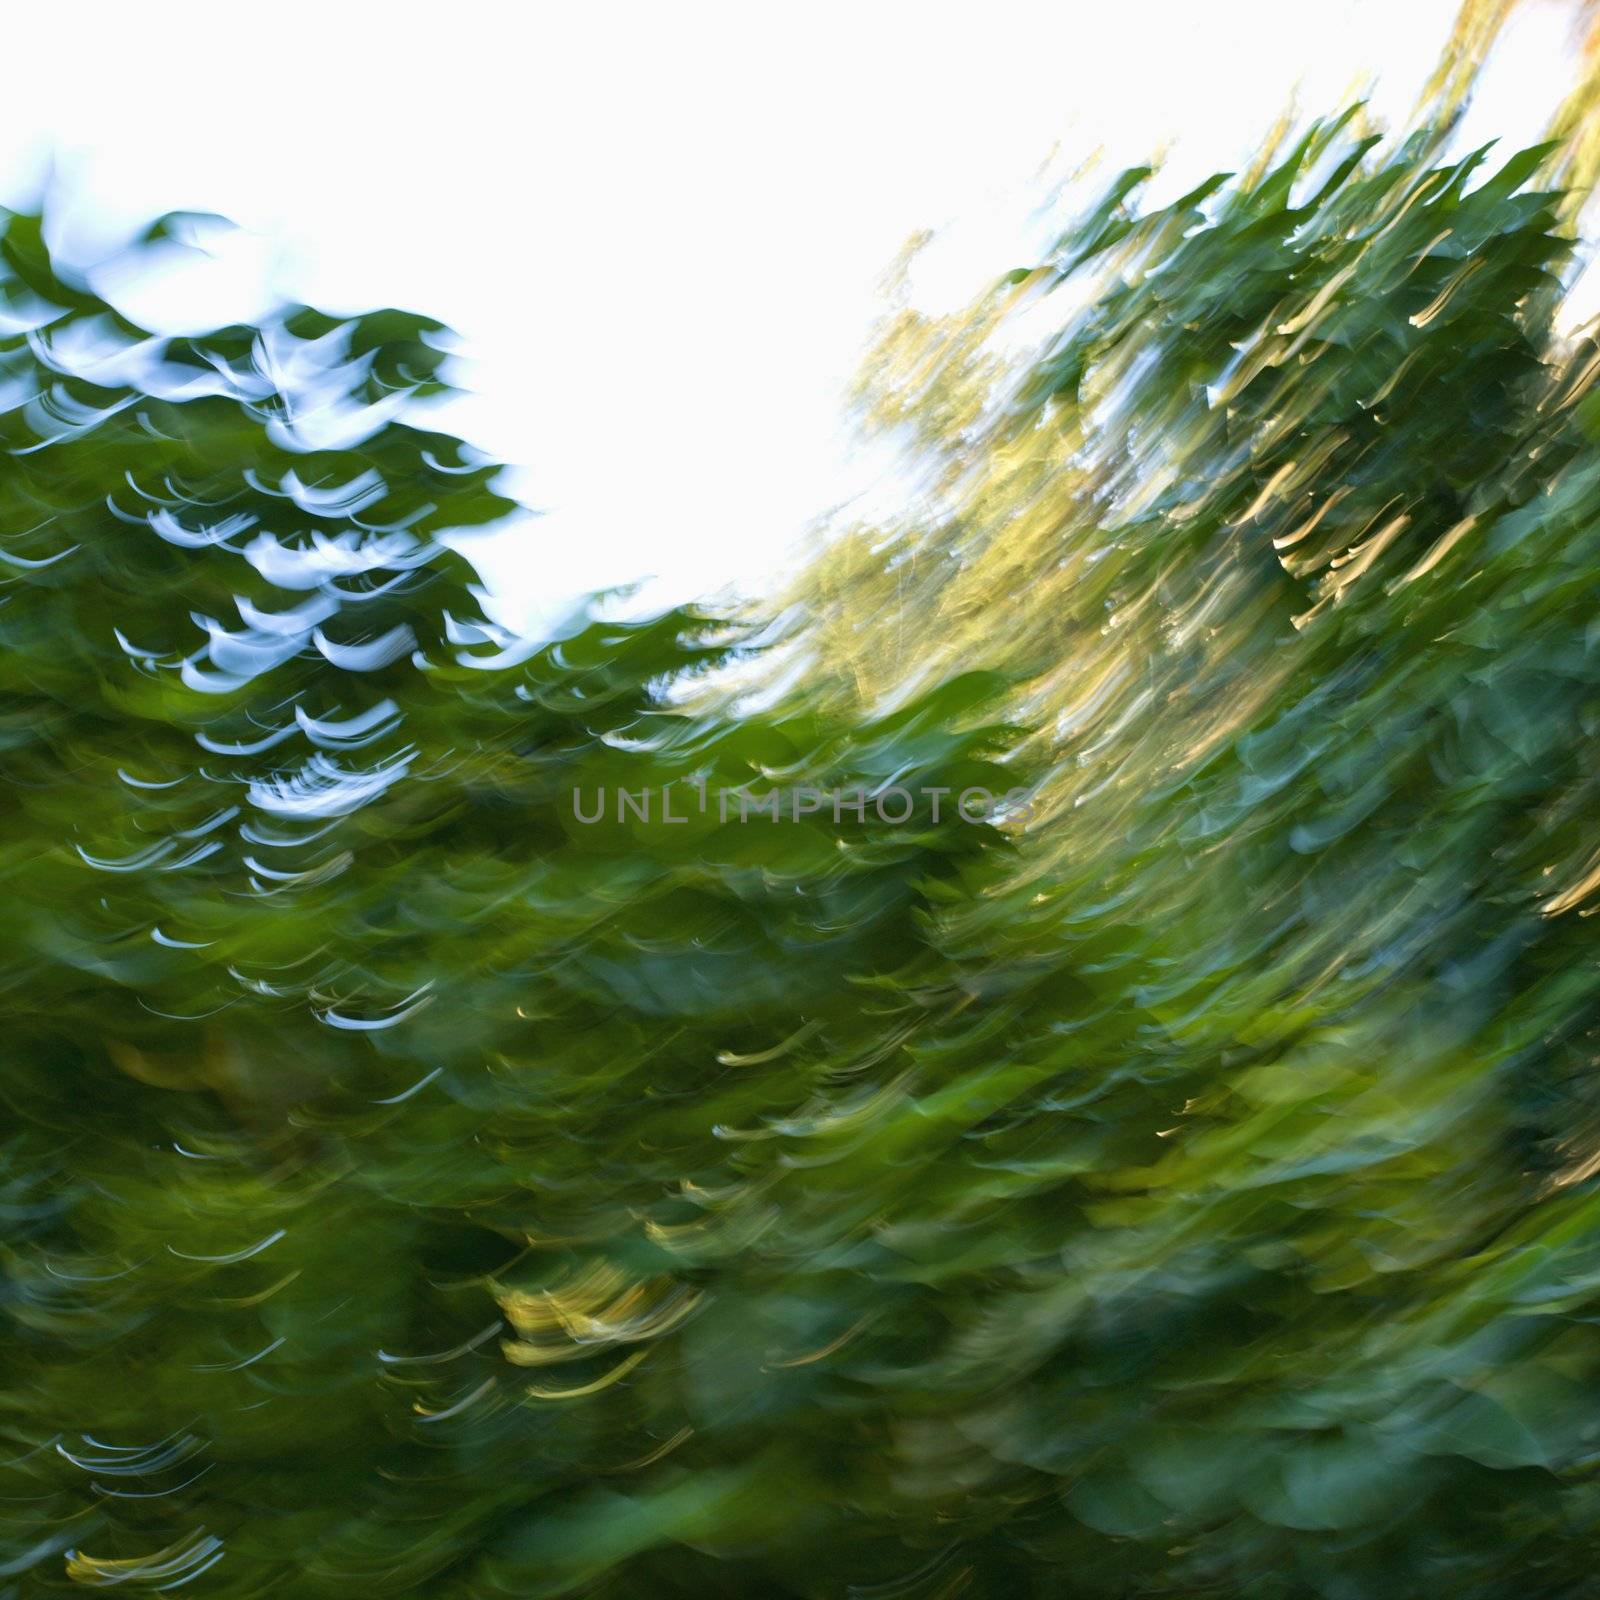 Motion blur of trees and leaves.